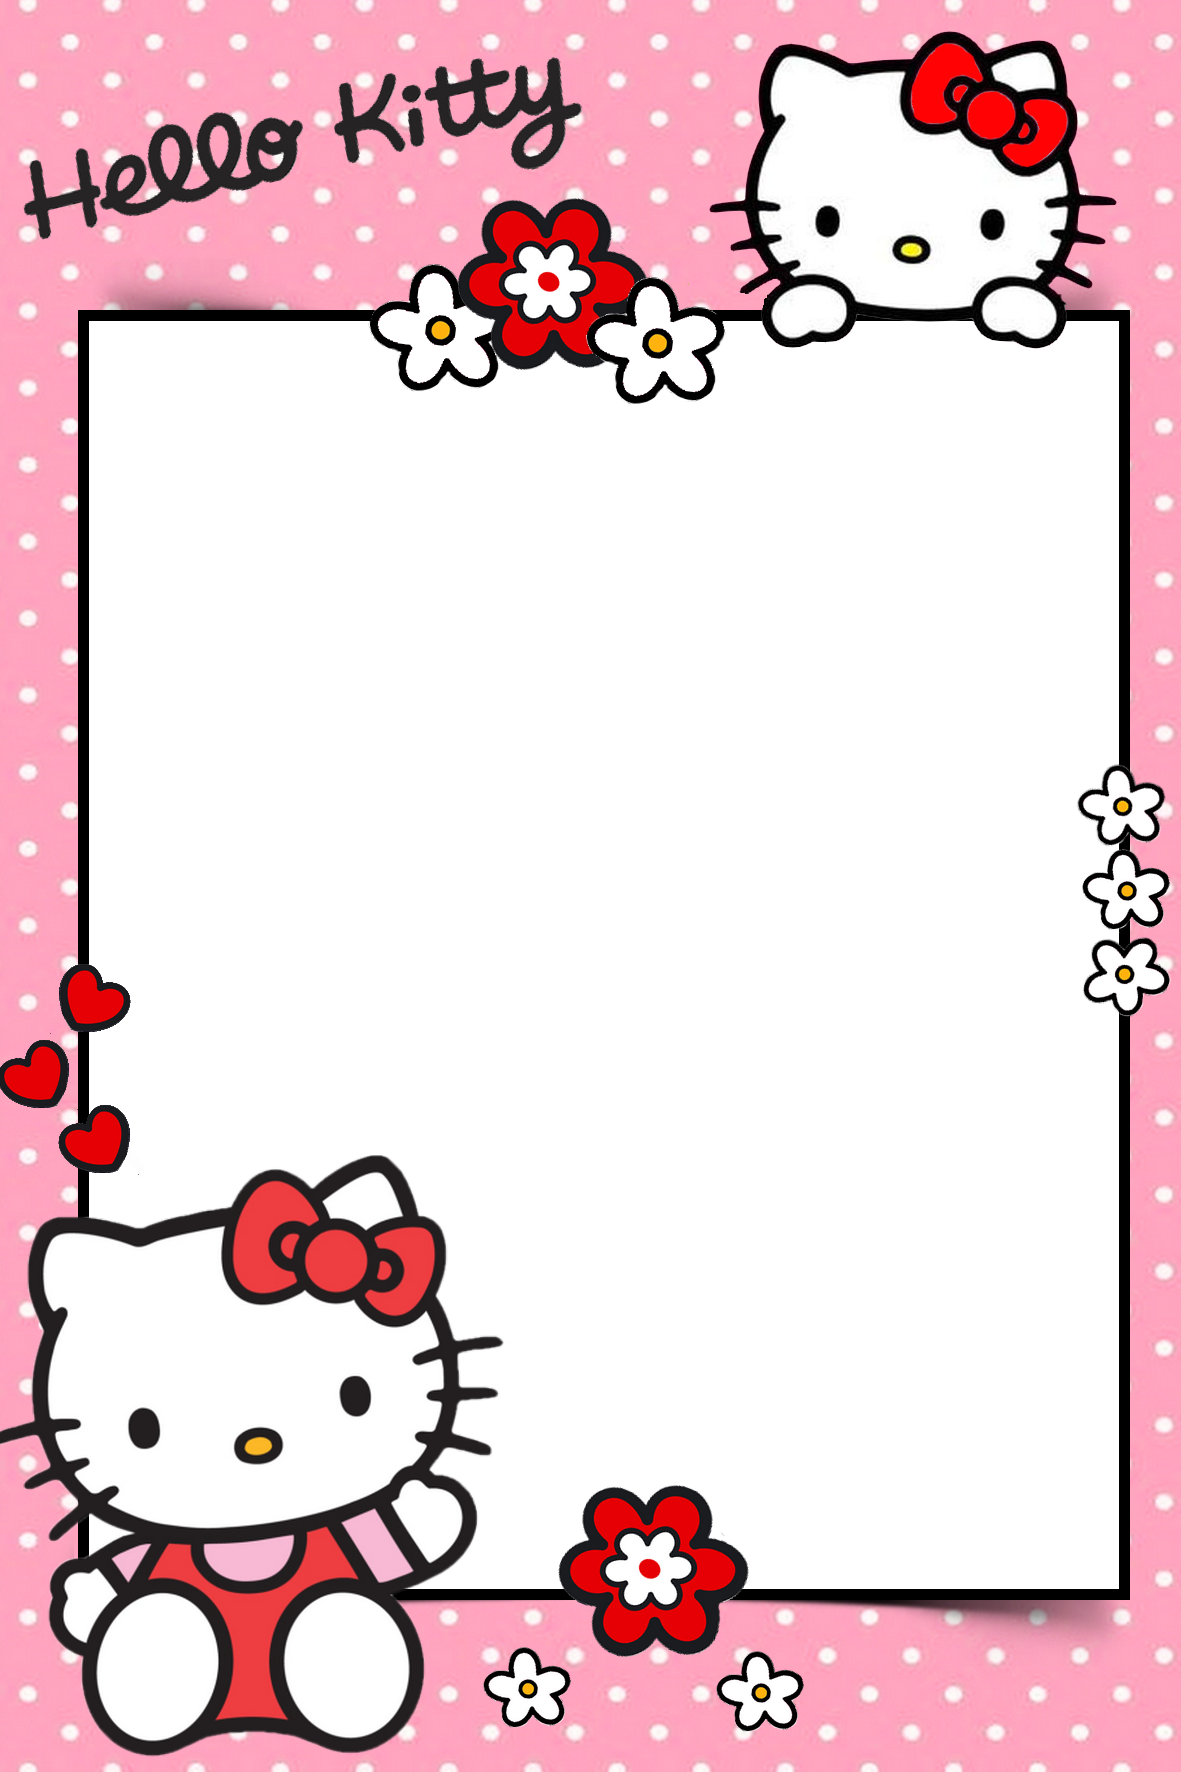 Hello kitty cadre PNG image